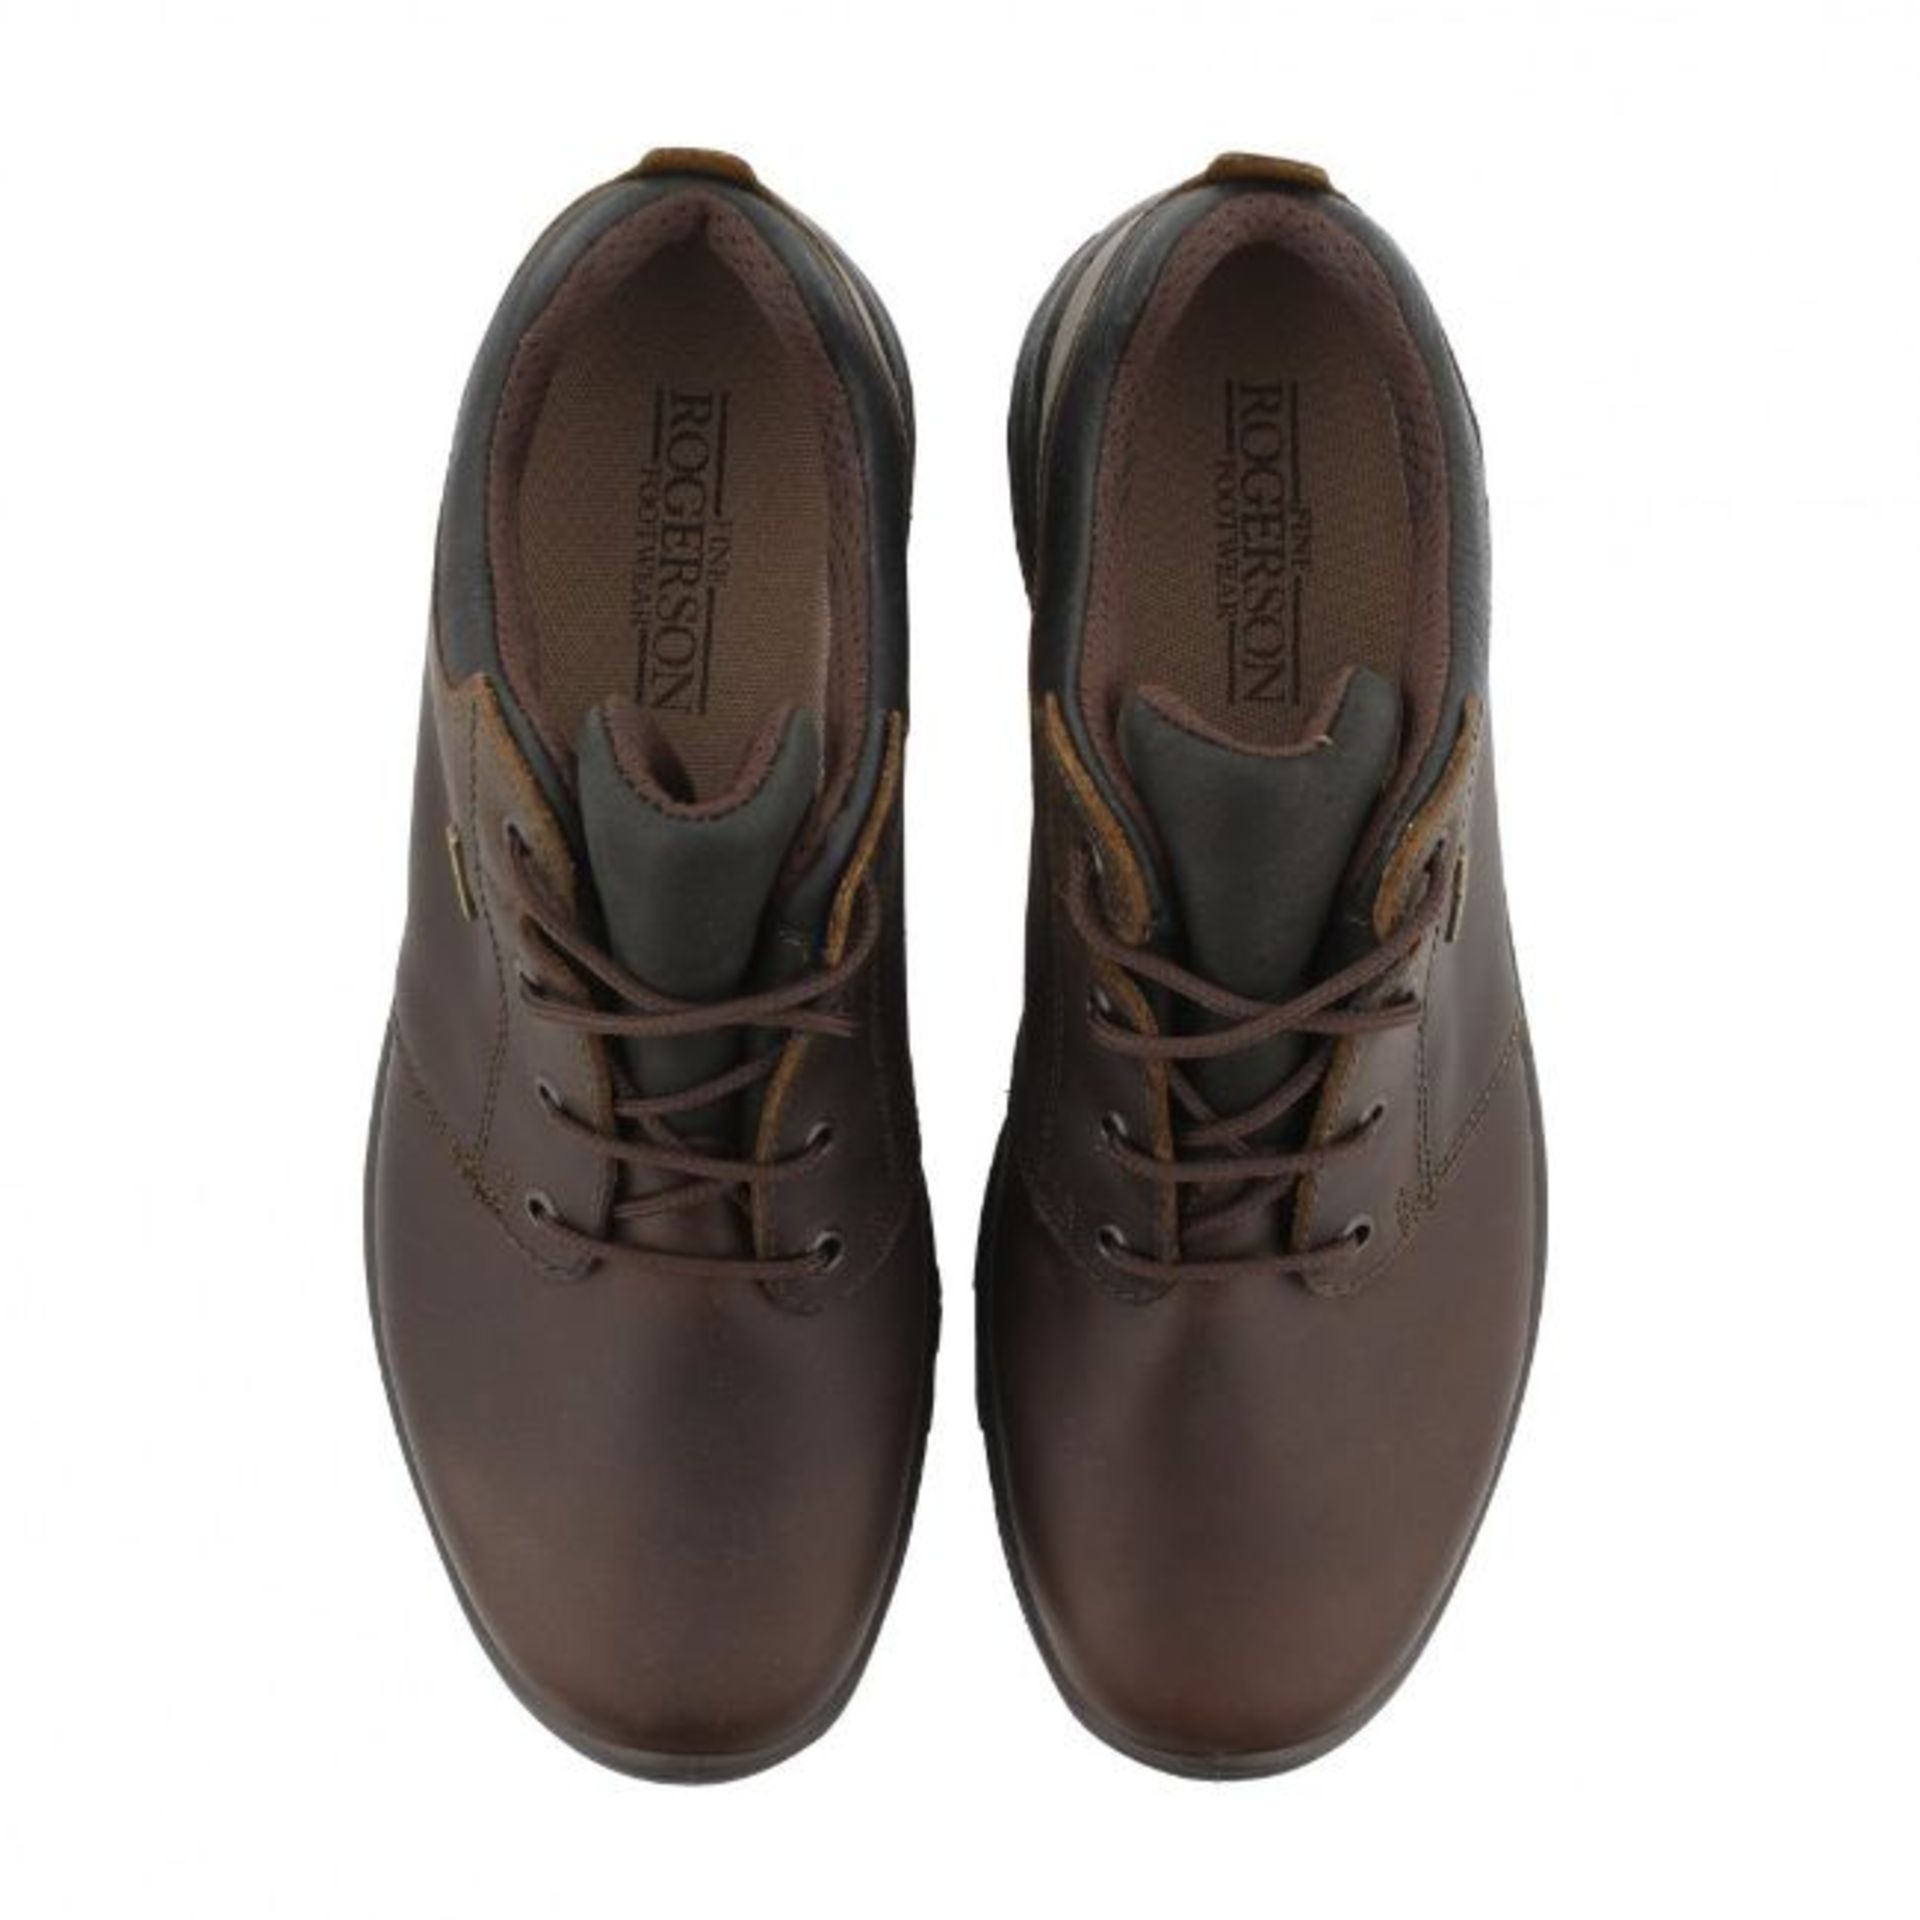 1 x Pair of Men's Grisport Brown Leather GriTex Shoes - Rogerson Footwear - Brand New and Boxed - - Image 5 of 8